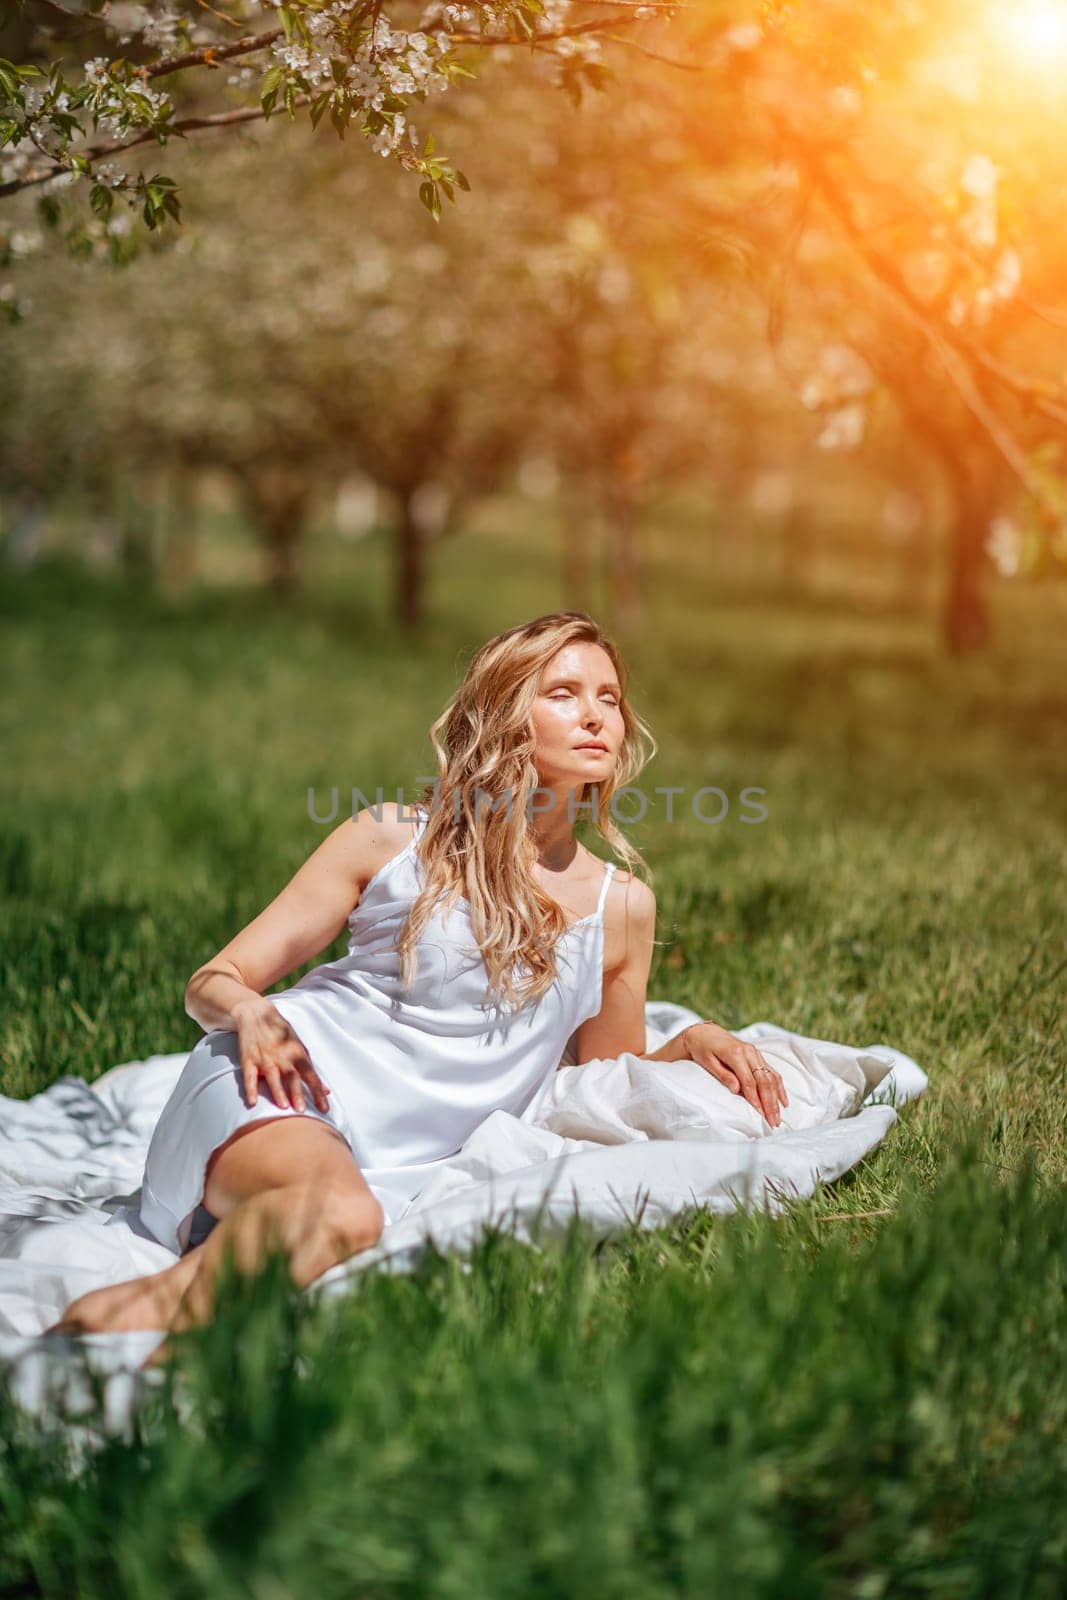 woman garden. she sleeps on a white bed in the fresh spring grass in the garden. Dressed in a blue nightgown. by Matiunina